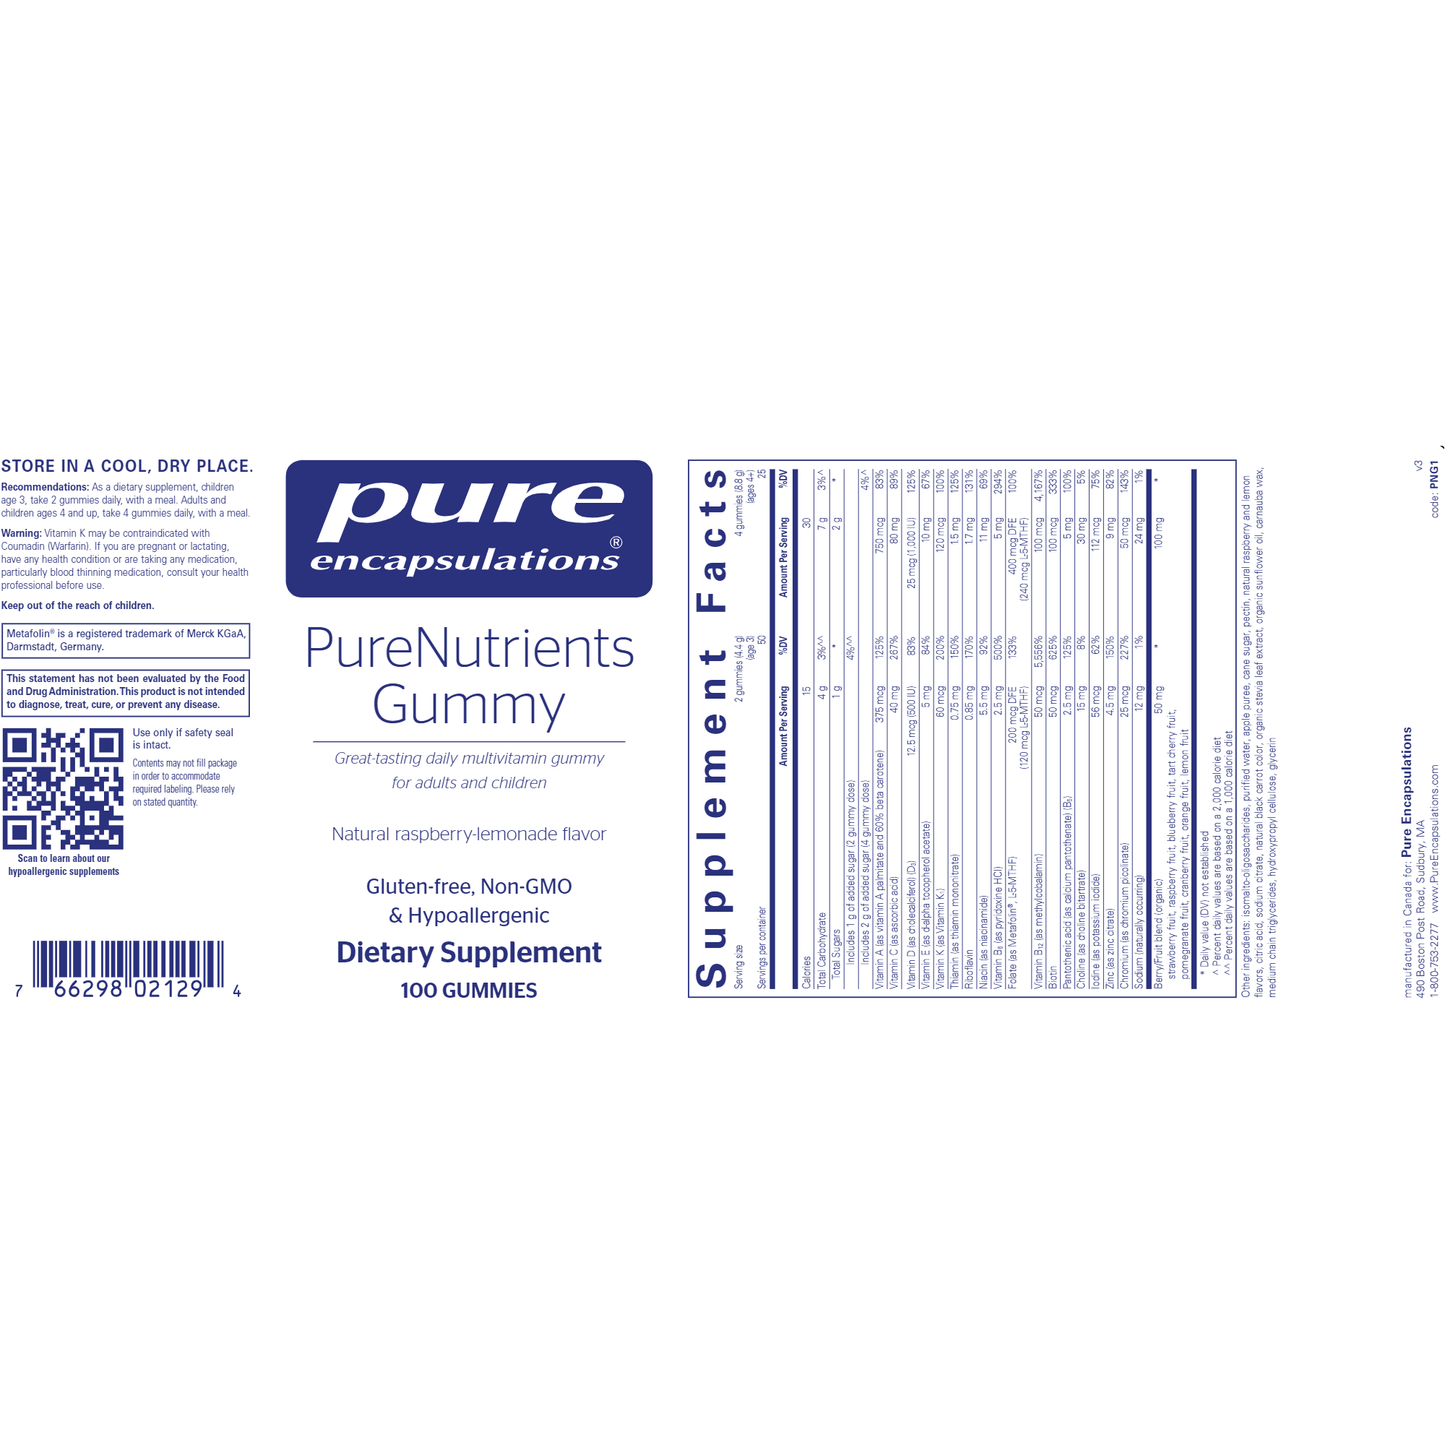 PureNutrients Gummy (currently on back order with manufacturer)